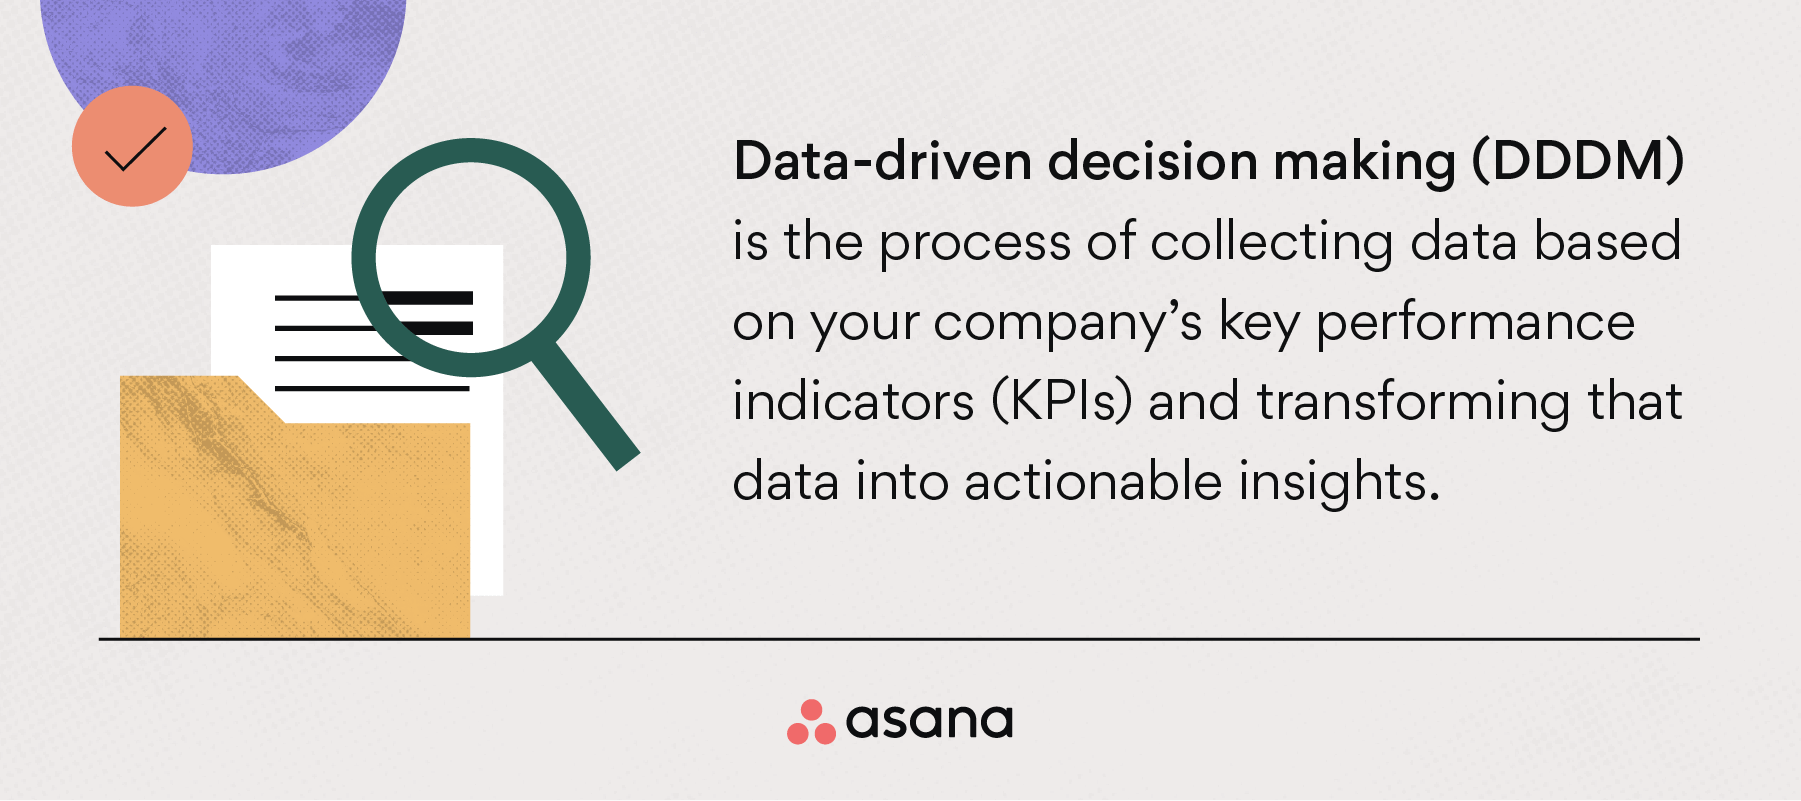 [inline illustration]  What is data-driven decision making (DDDM)? (infographic)